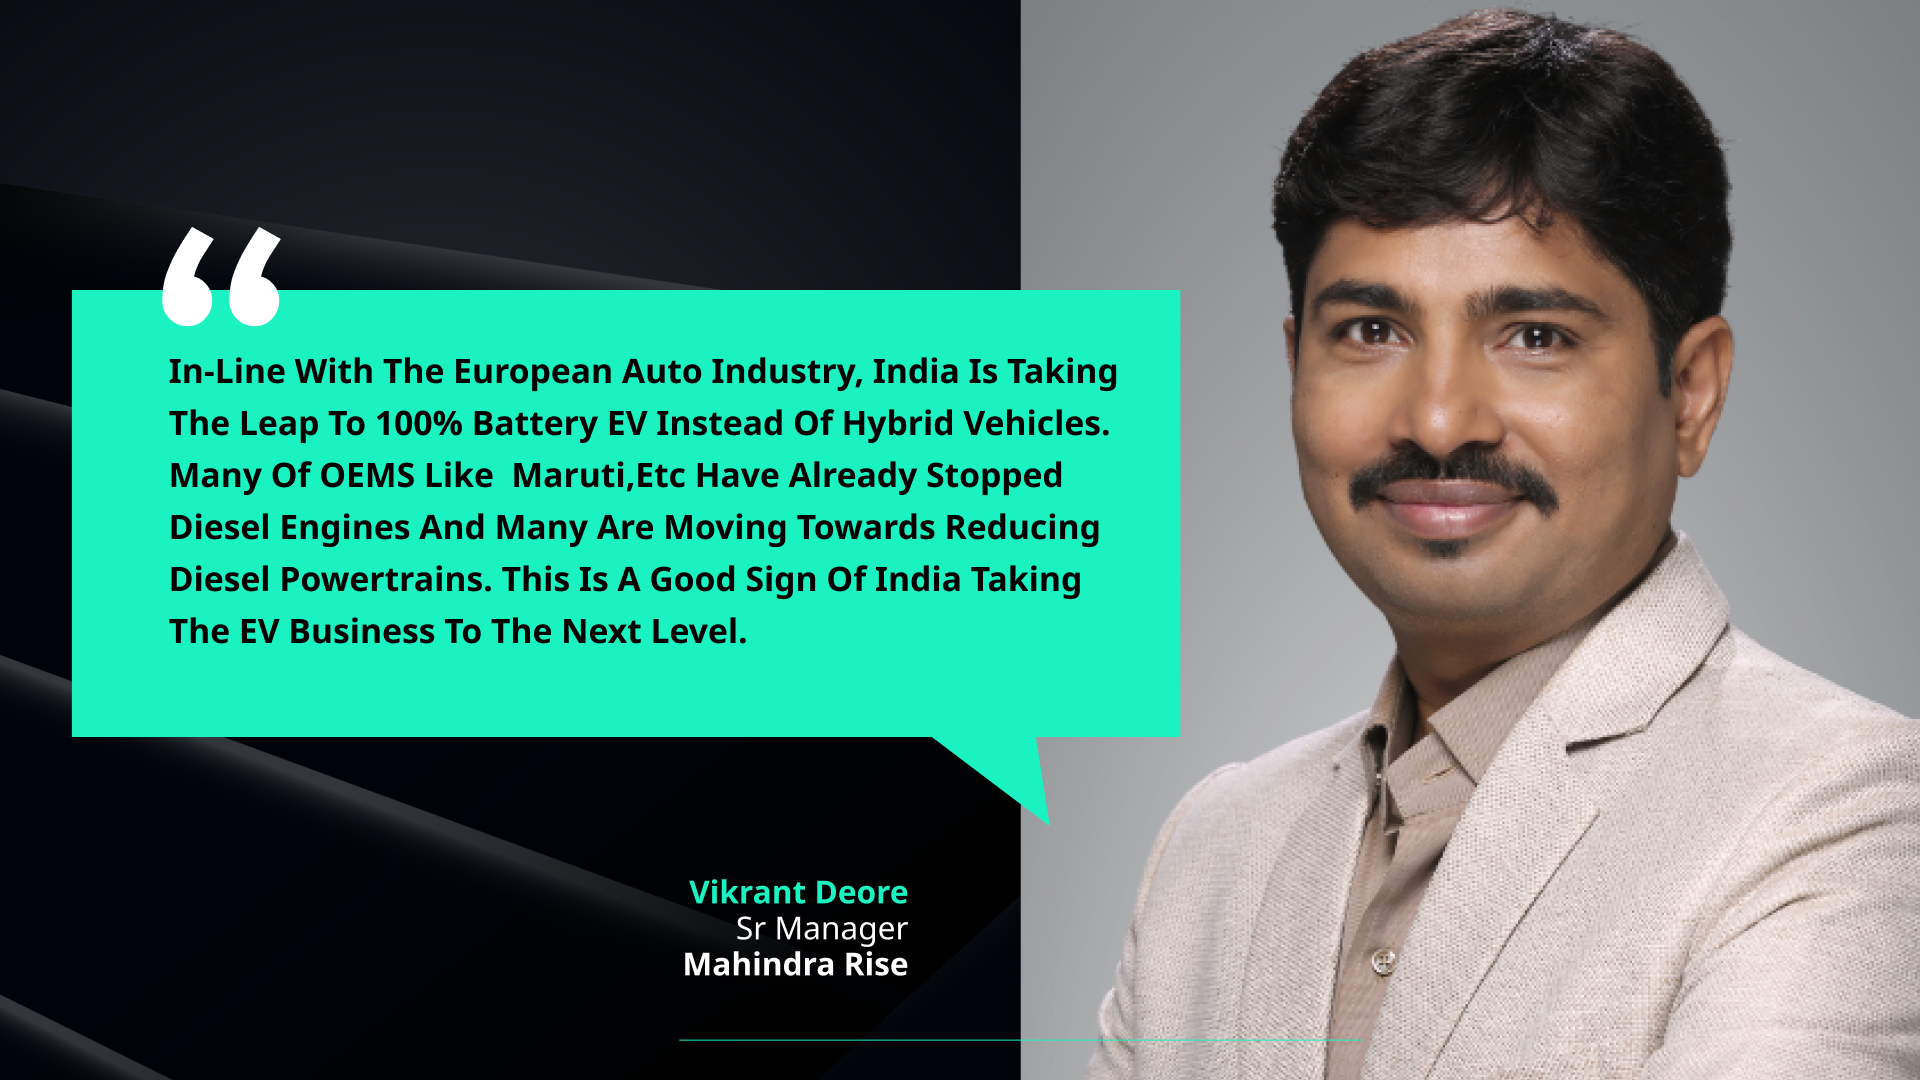 An Insightful Q&A Session With Mr Vikrant Deore, Sr Manager Mahindra Rise